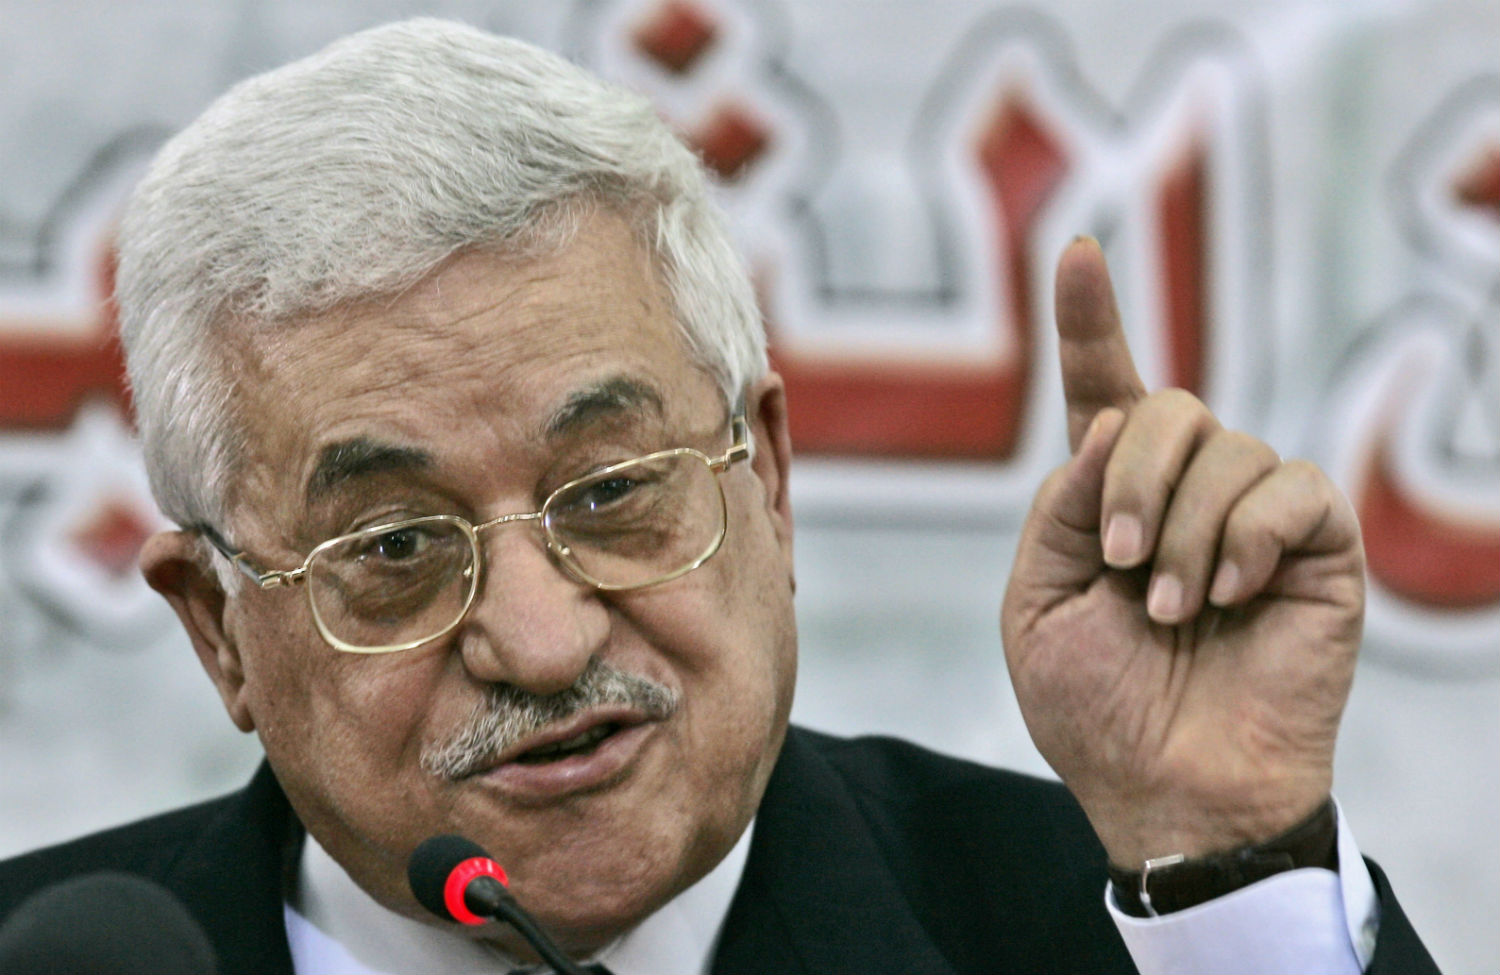 The Fatah-Hamas Accord Could Rewrite the Rules in the Middle East